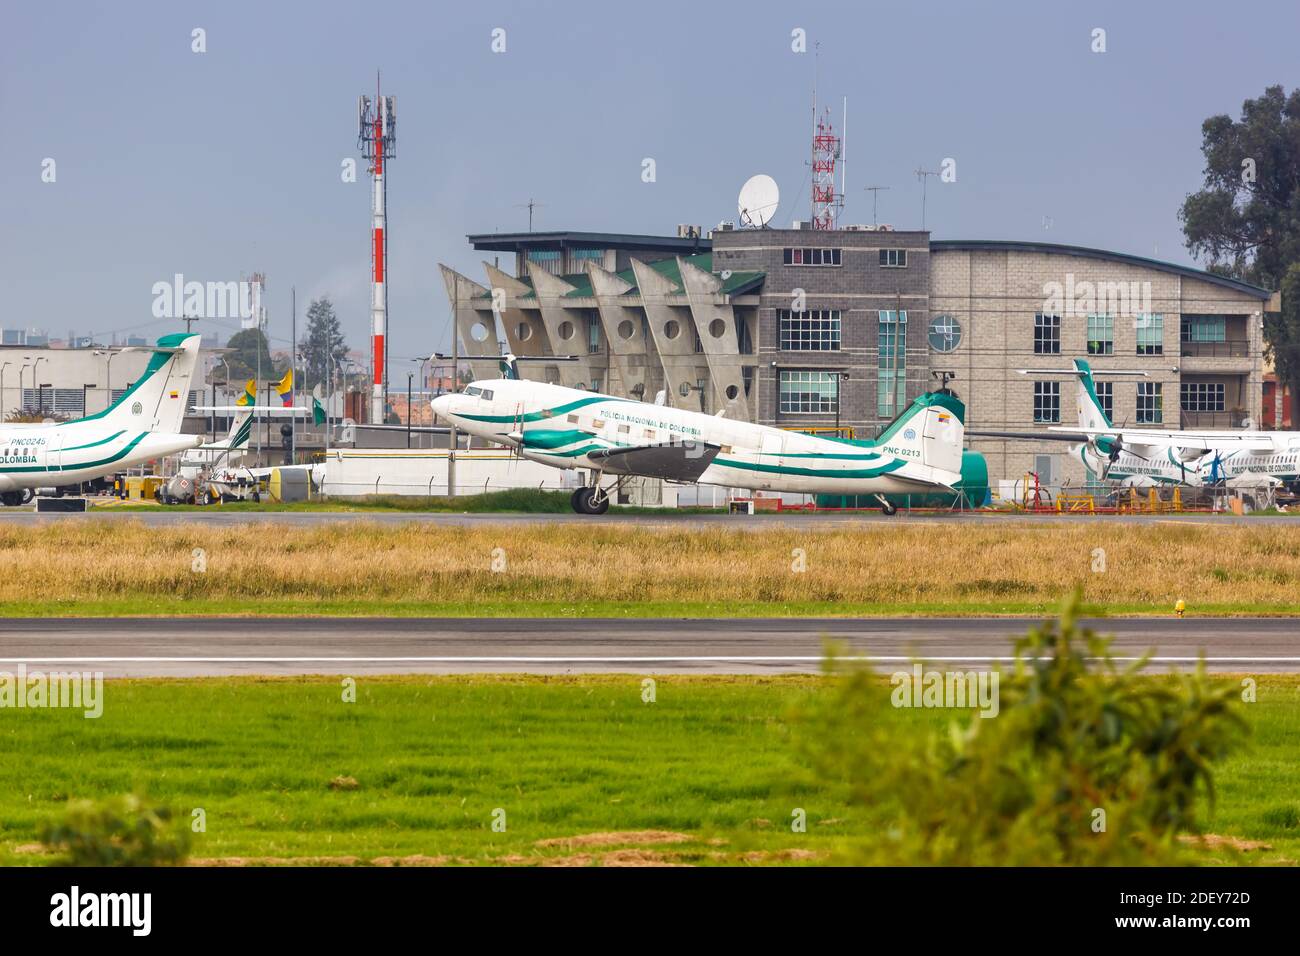 Bogota, Colombia - January 30, 2019: Policia Nacional de Colombia PNC Douglas Basler BT-67 Turbo-67 DC-3 airplane at Bogota Airport (BOG) in Colombia. Stock Photo